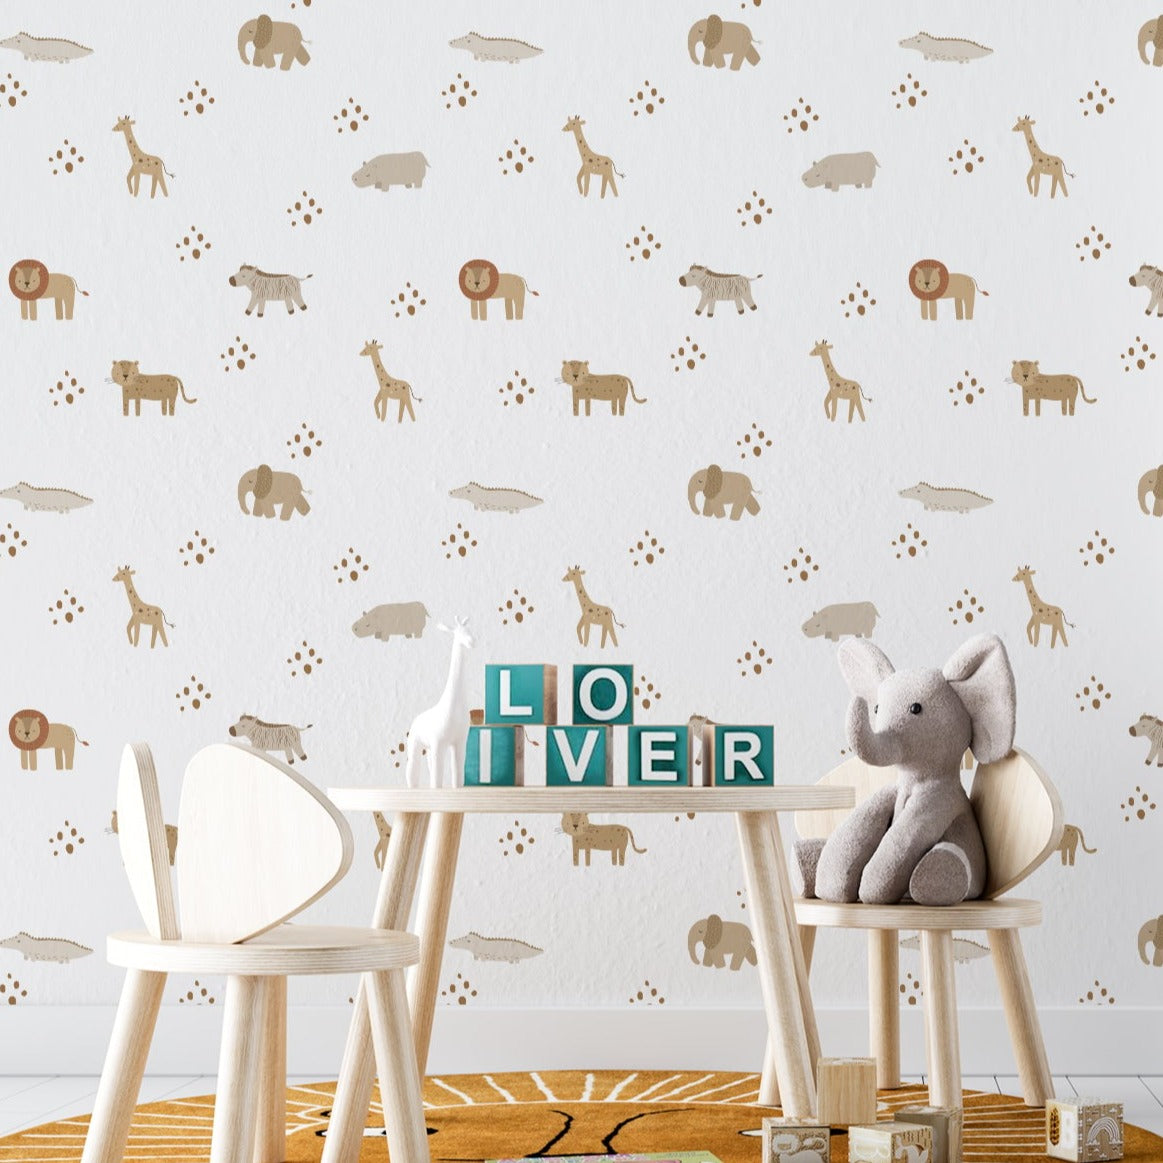 the wallpaper creates a delightful backdrop to a child's study and play area, featuring a wooden table and chairs with a plush elephant toy sitting attentively. The safari theme of the wallpaper adds a sense of adventure and curiosity to the learning environment, enhancing the room with a sense of whimsy and wonder.